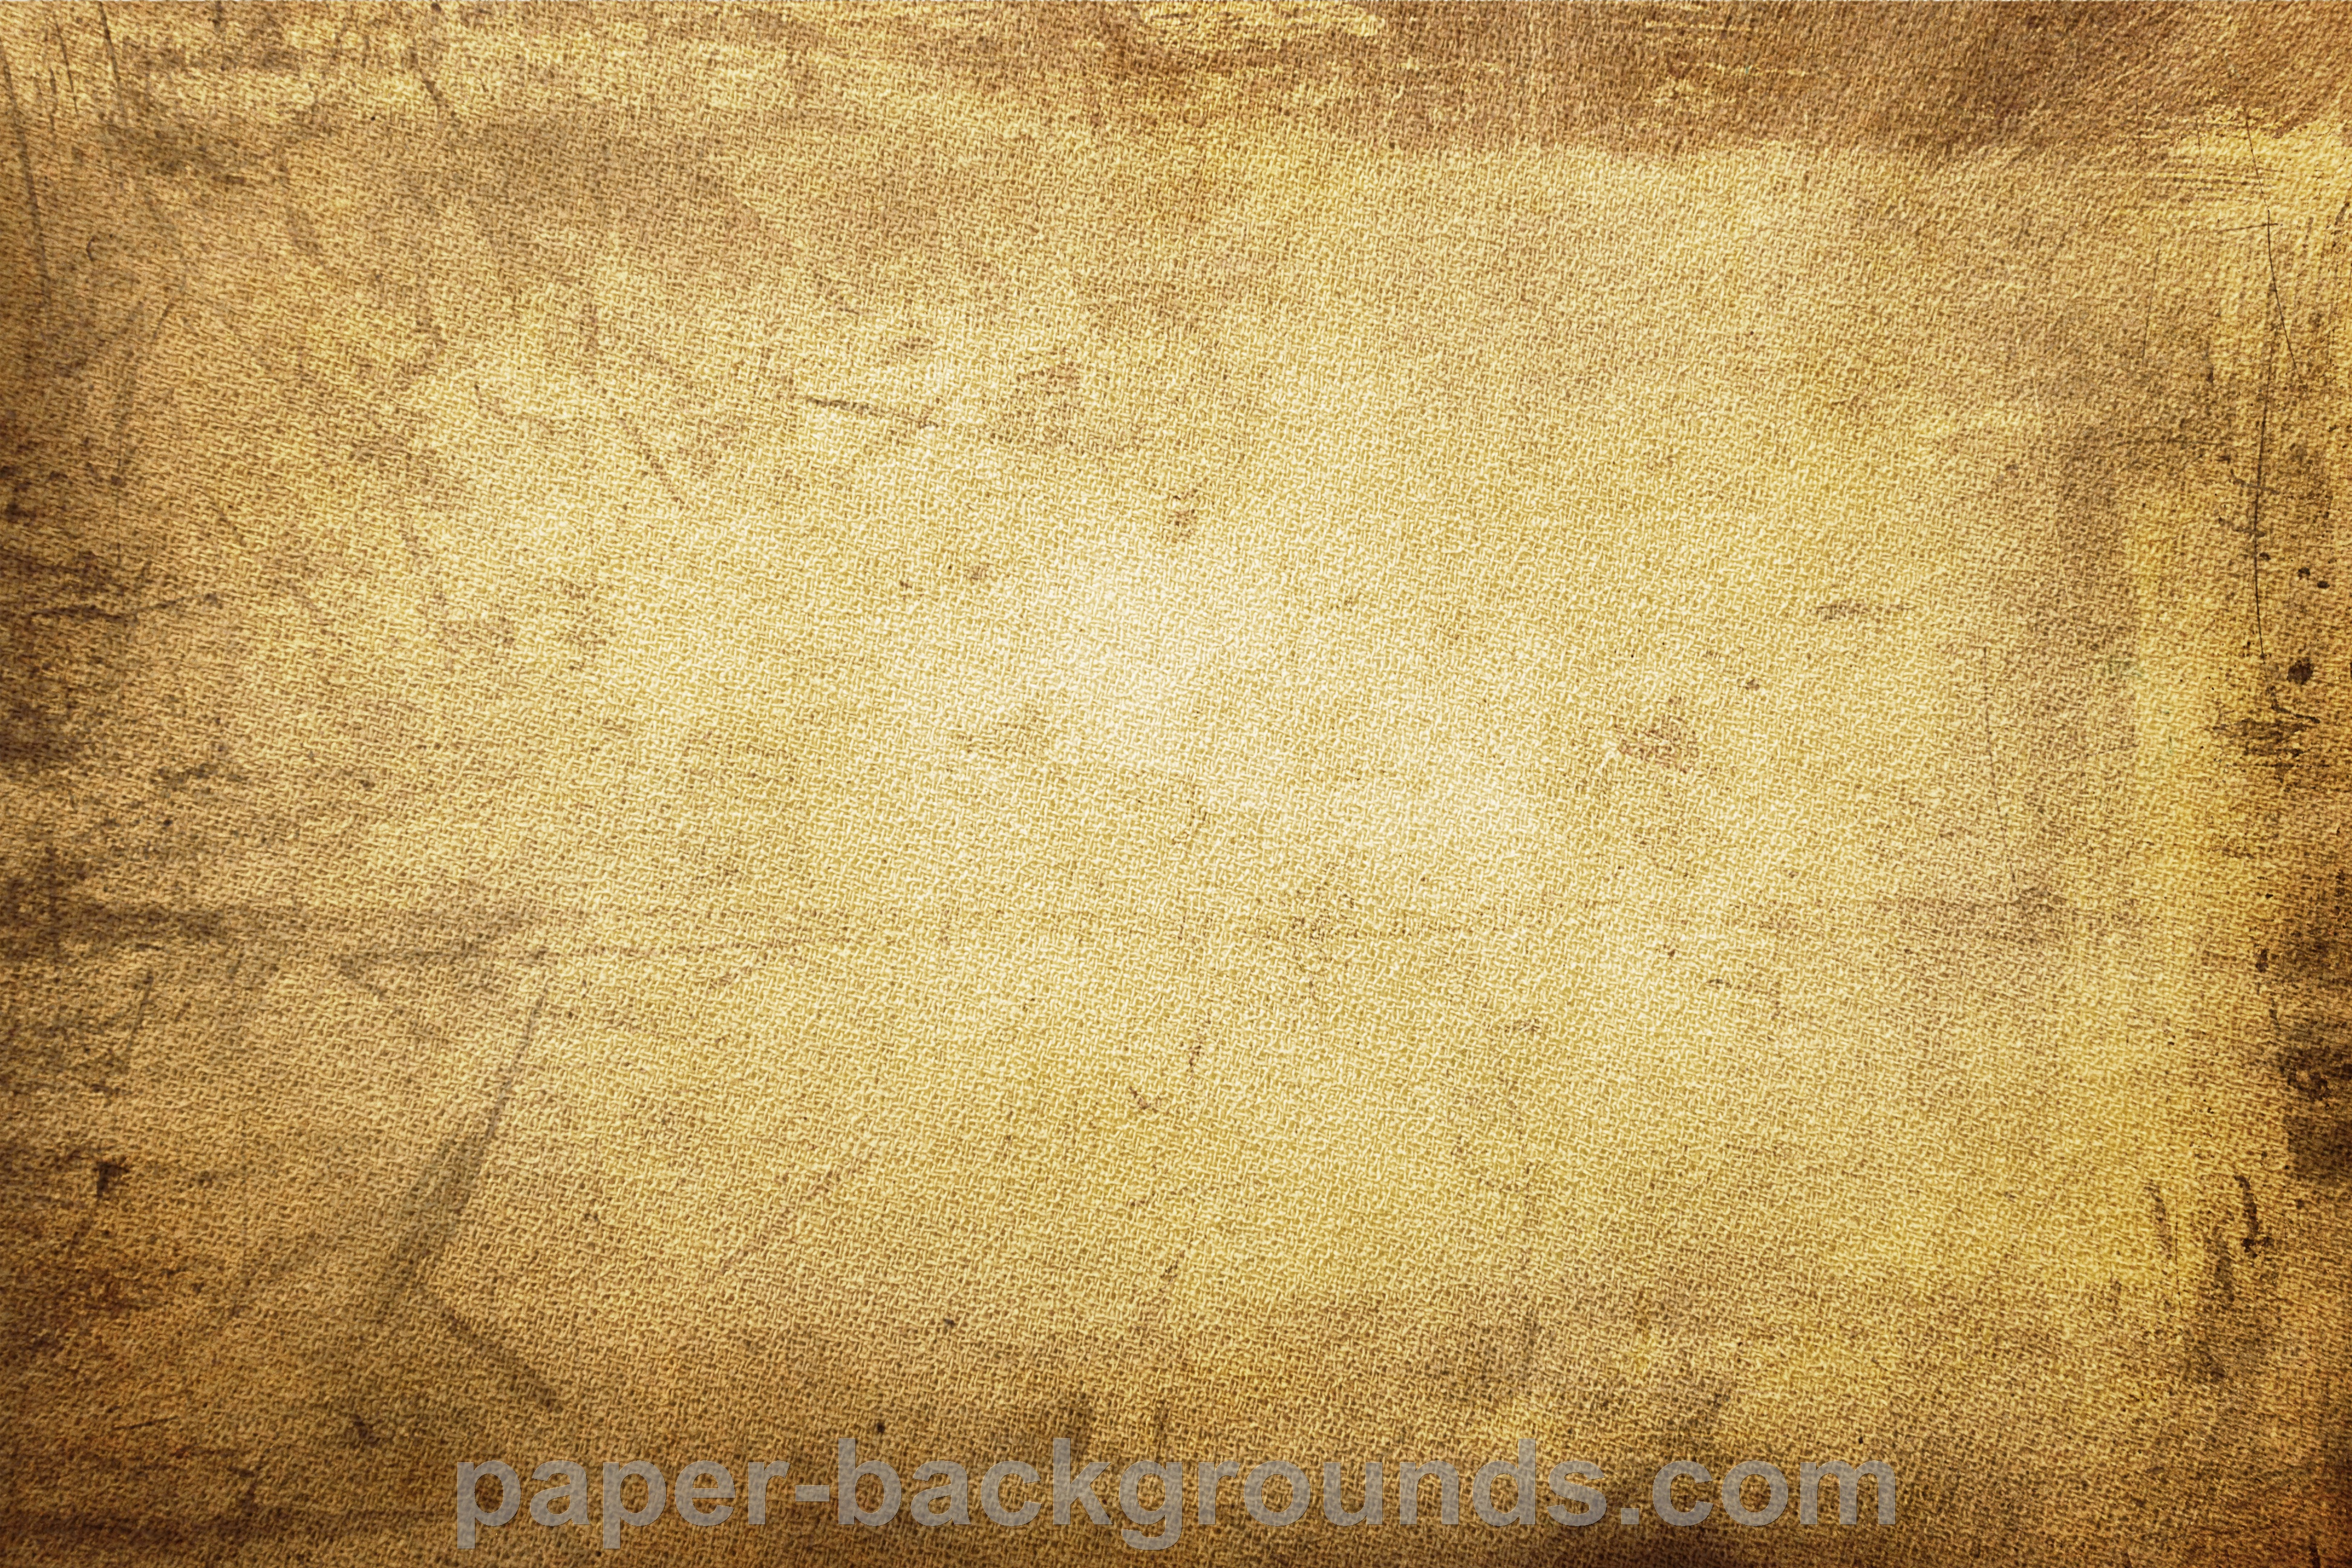 Yellow Vintage Fabric Texture Background High Resolution 3888 x 2592